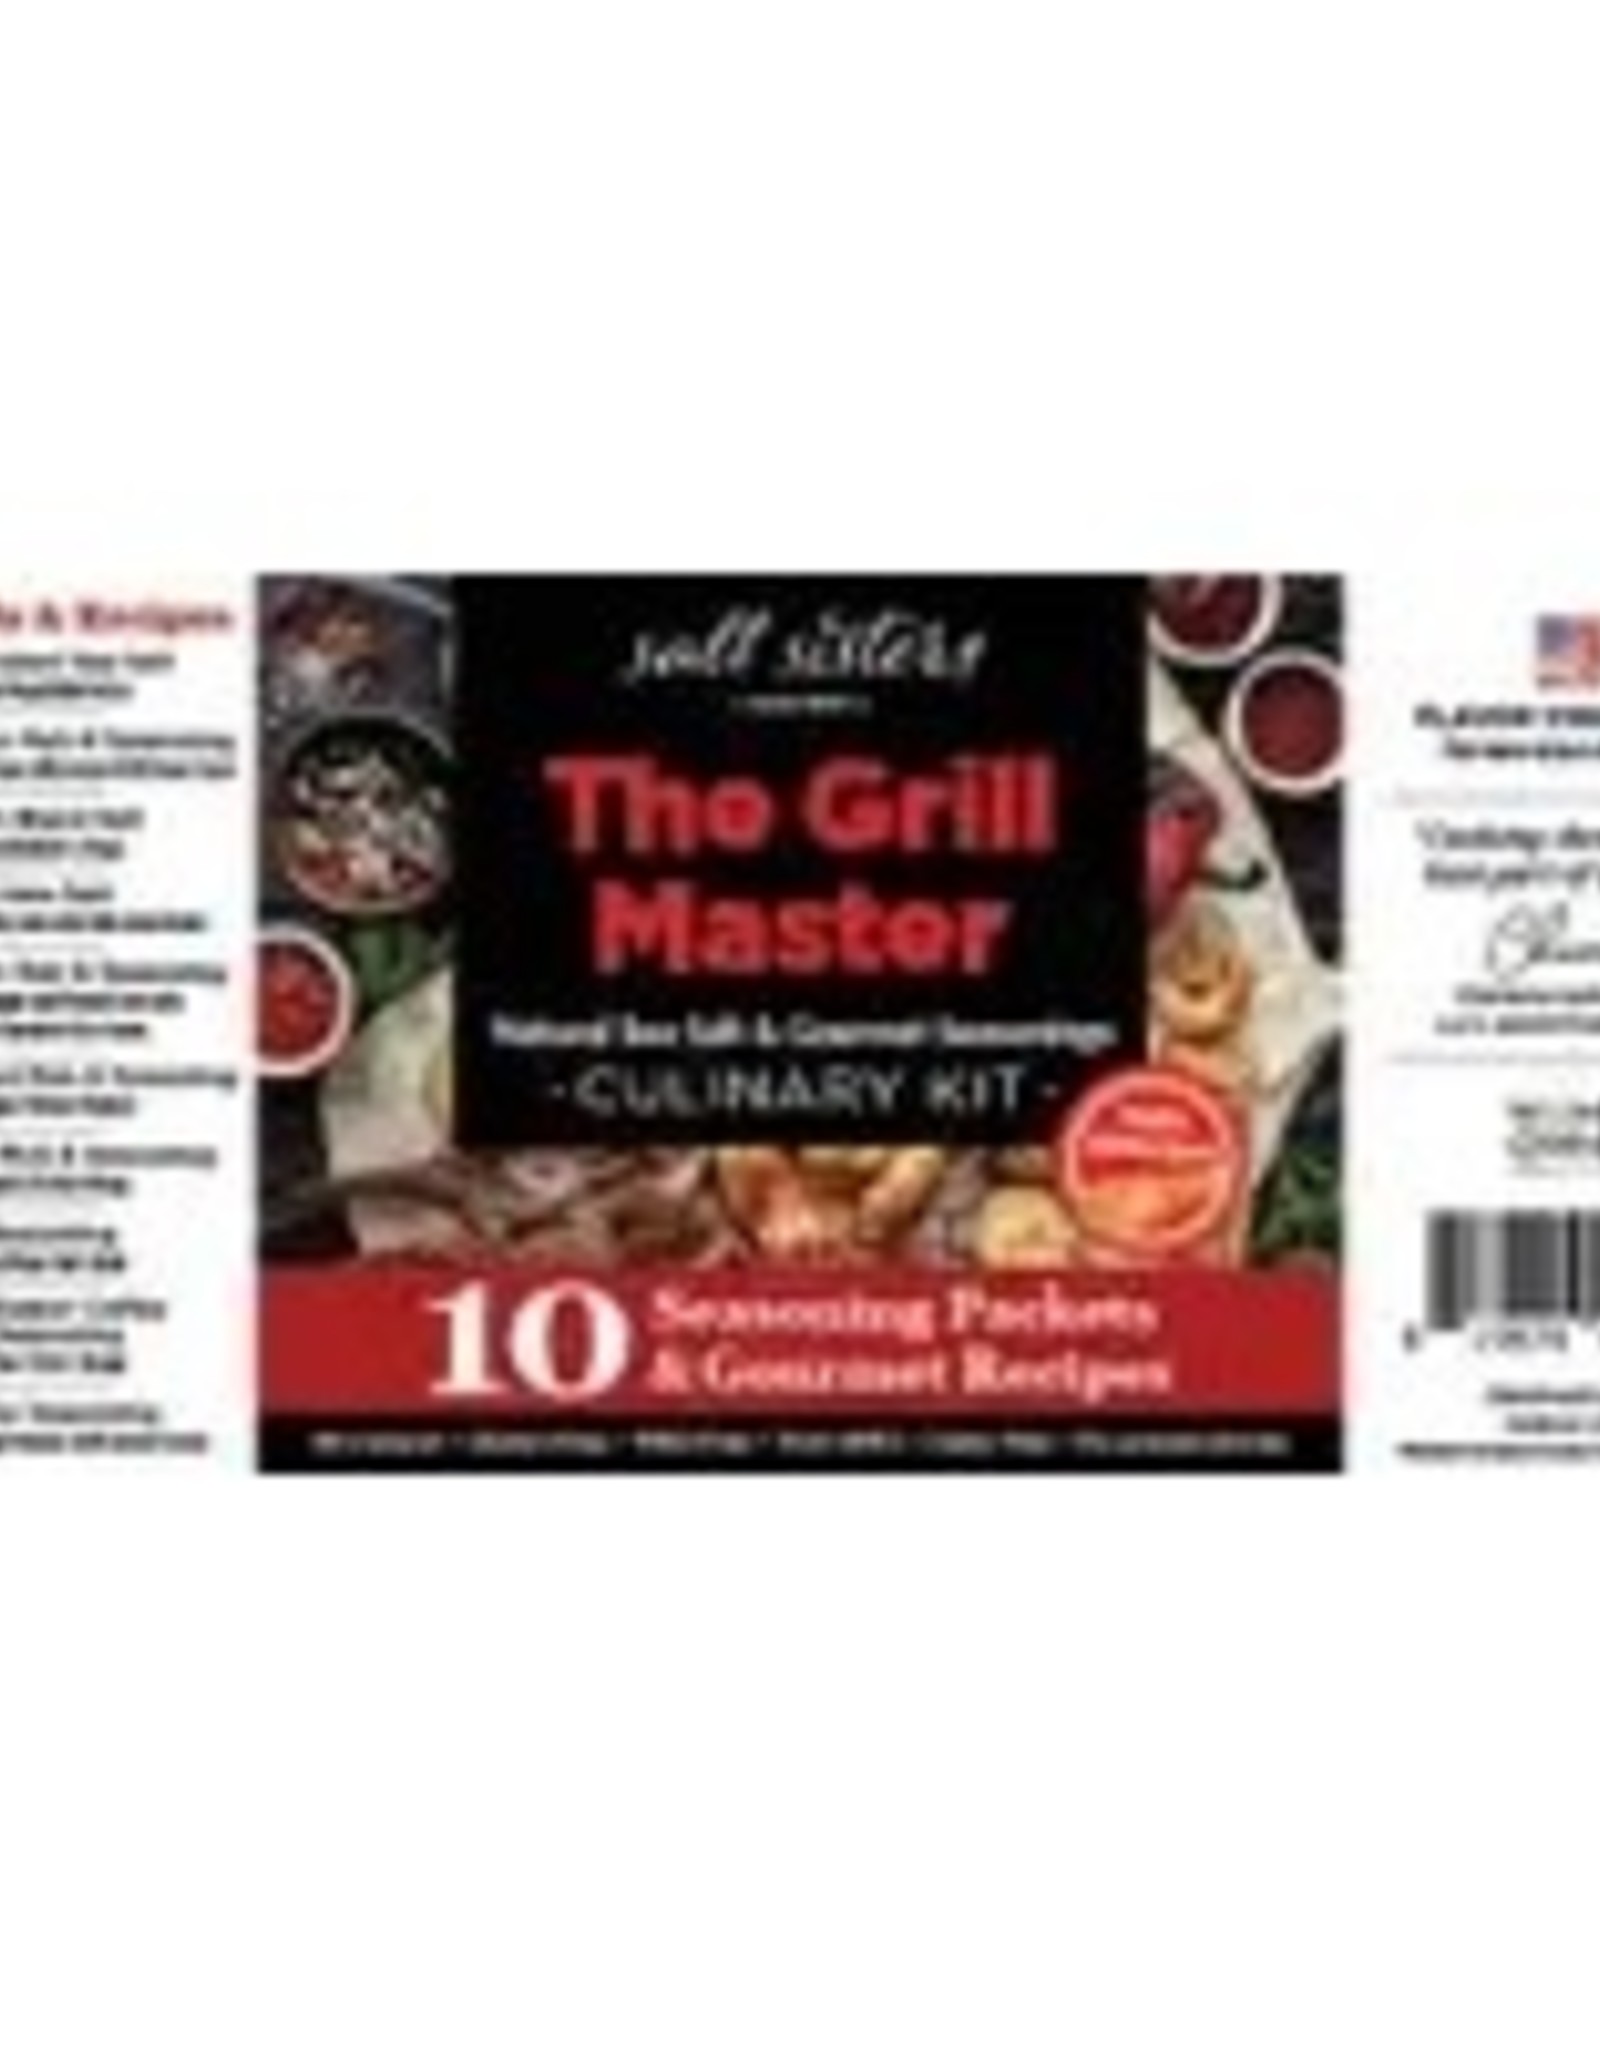 s.a.l.t. sisters CULINARY KIT - THE GRILL MASTER